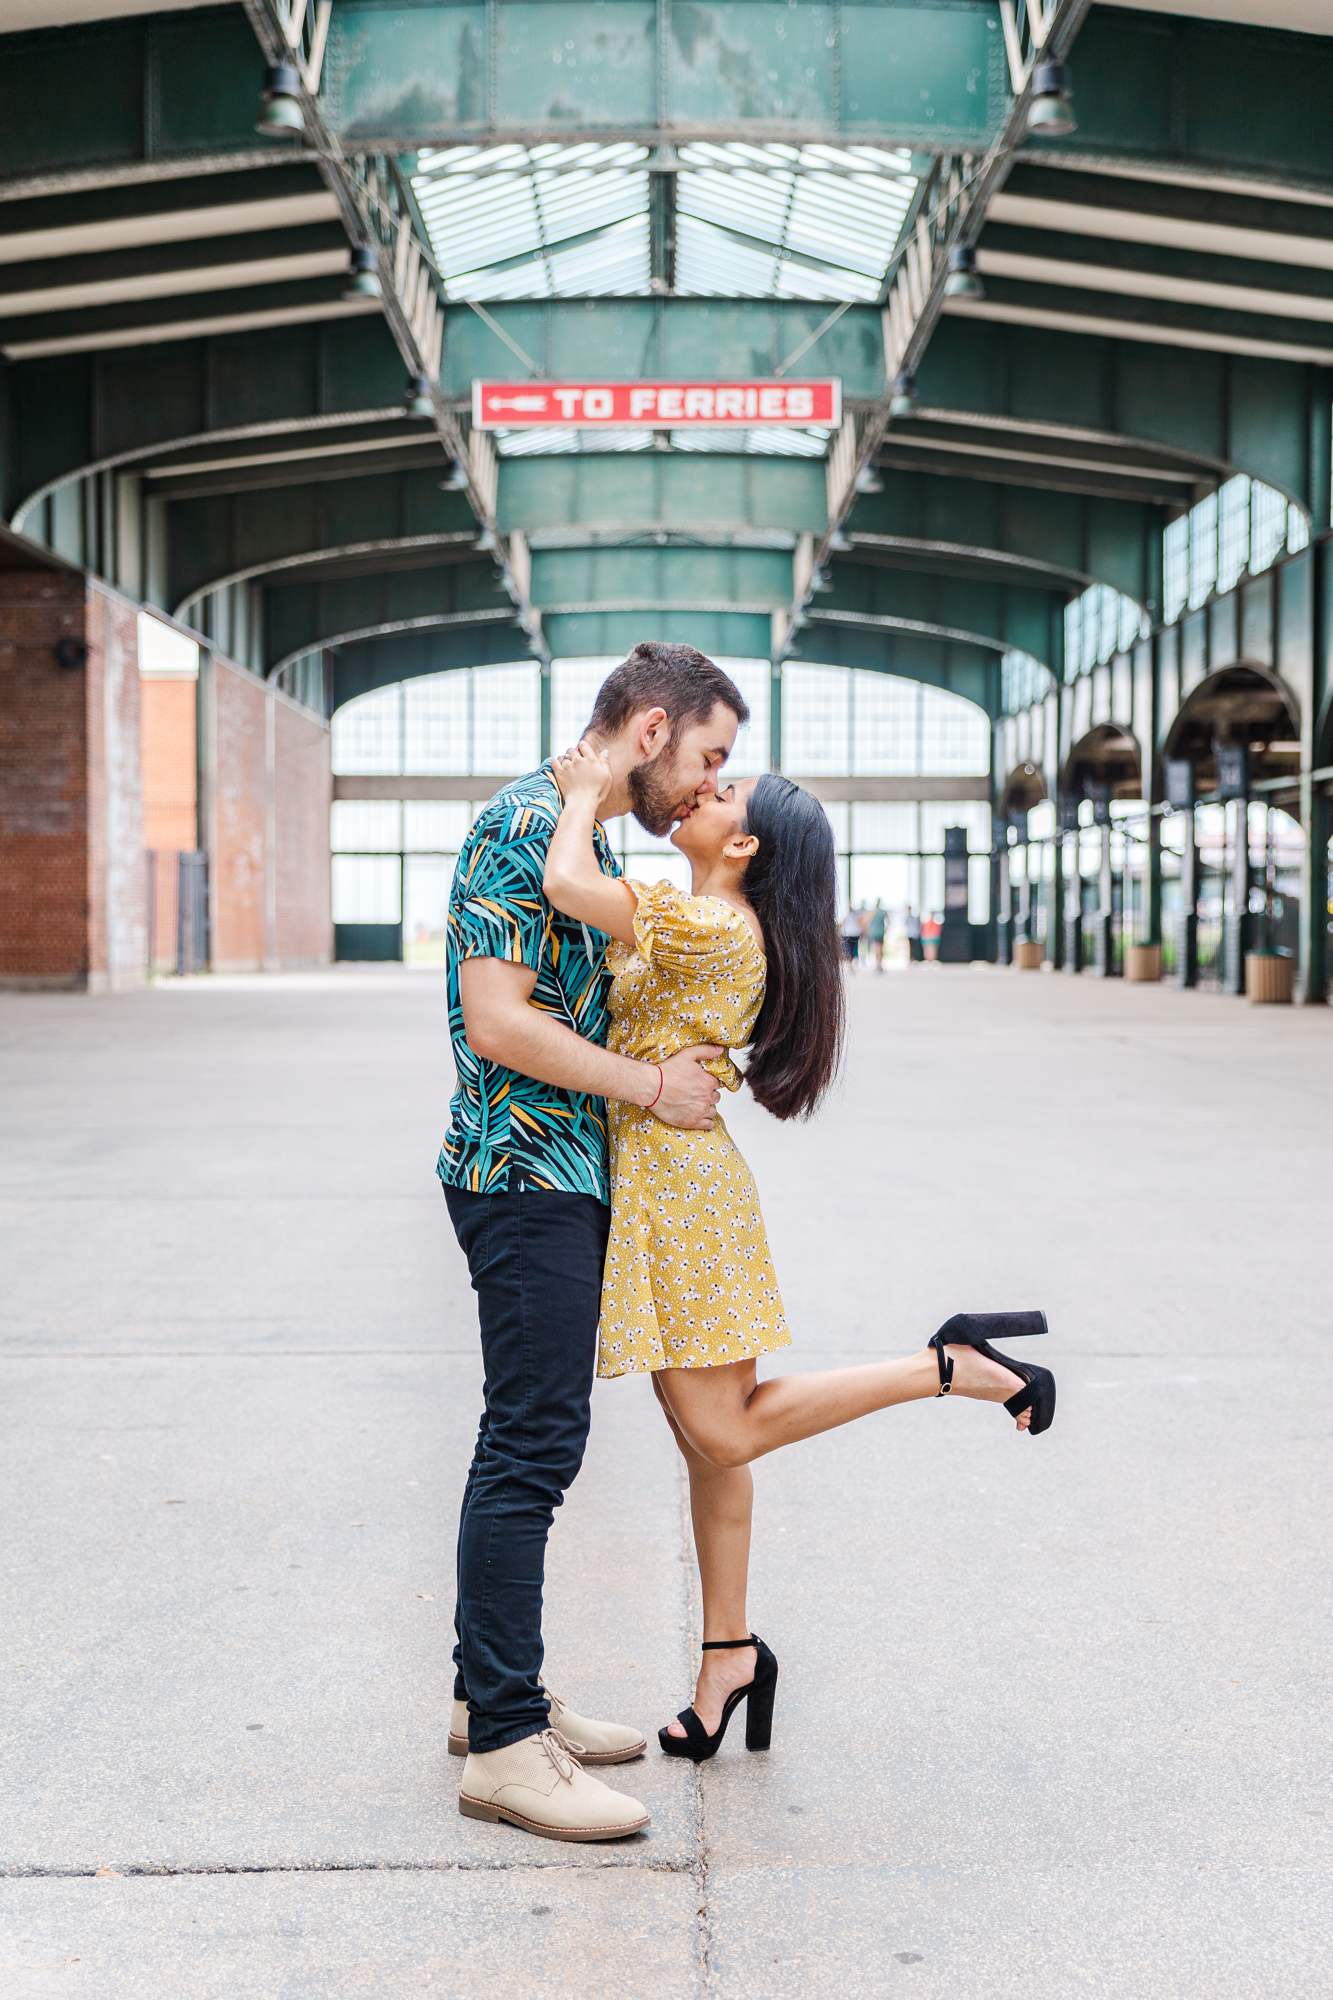 Stunning Overcast Liberty State Park Engagement Photography